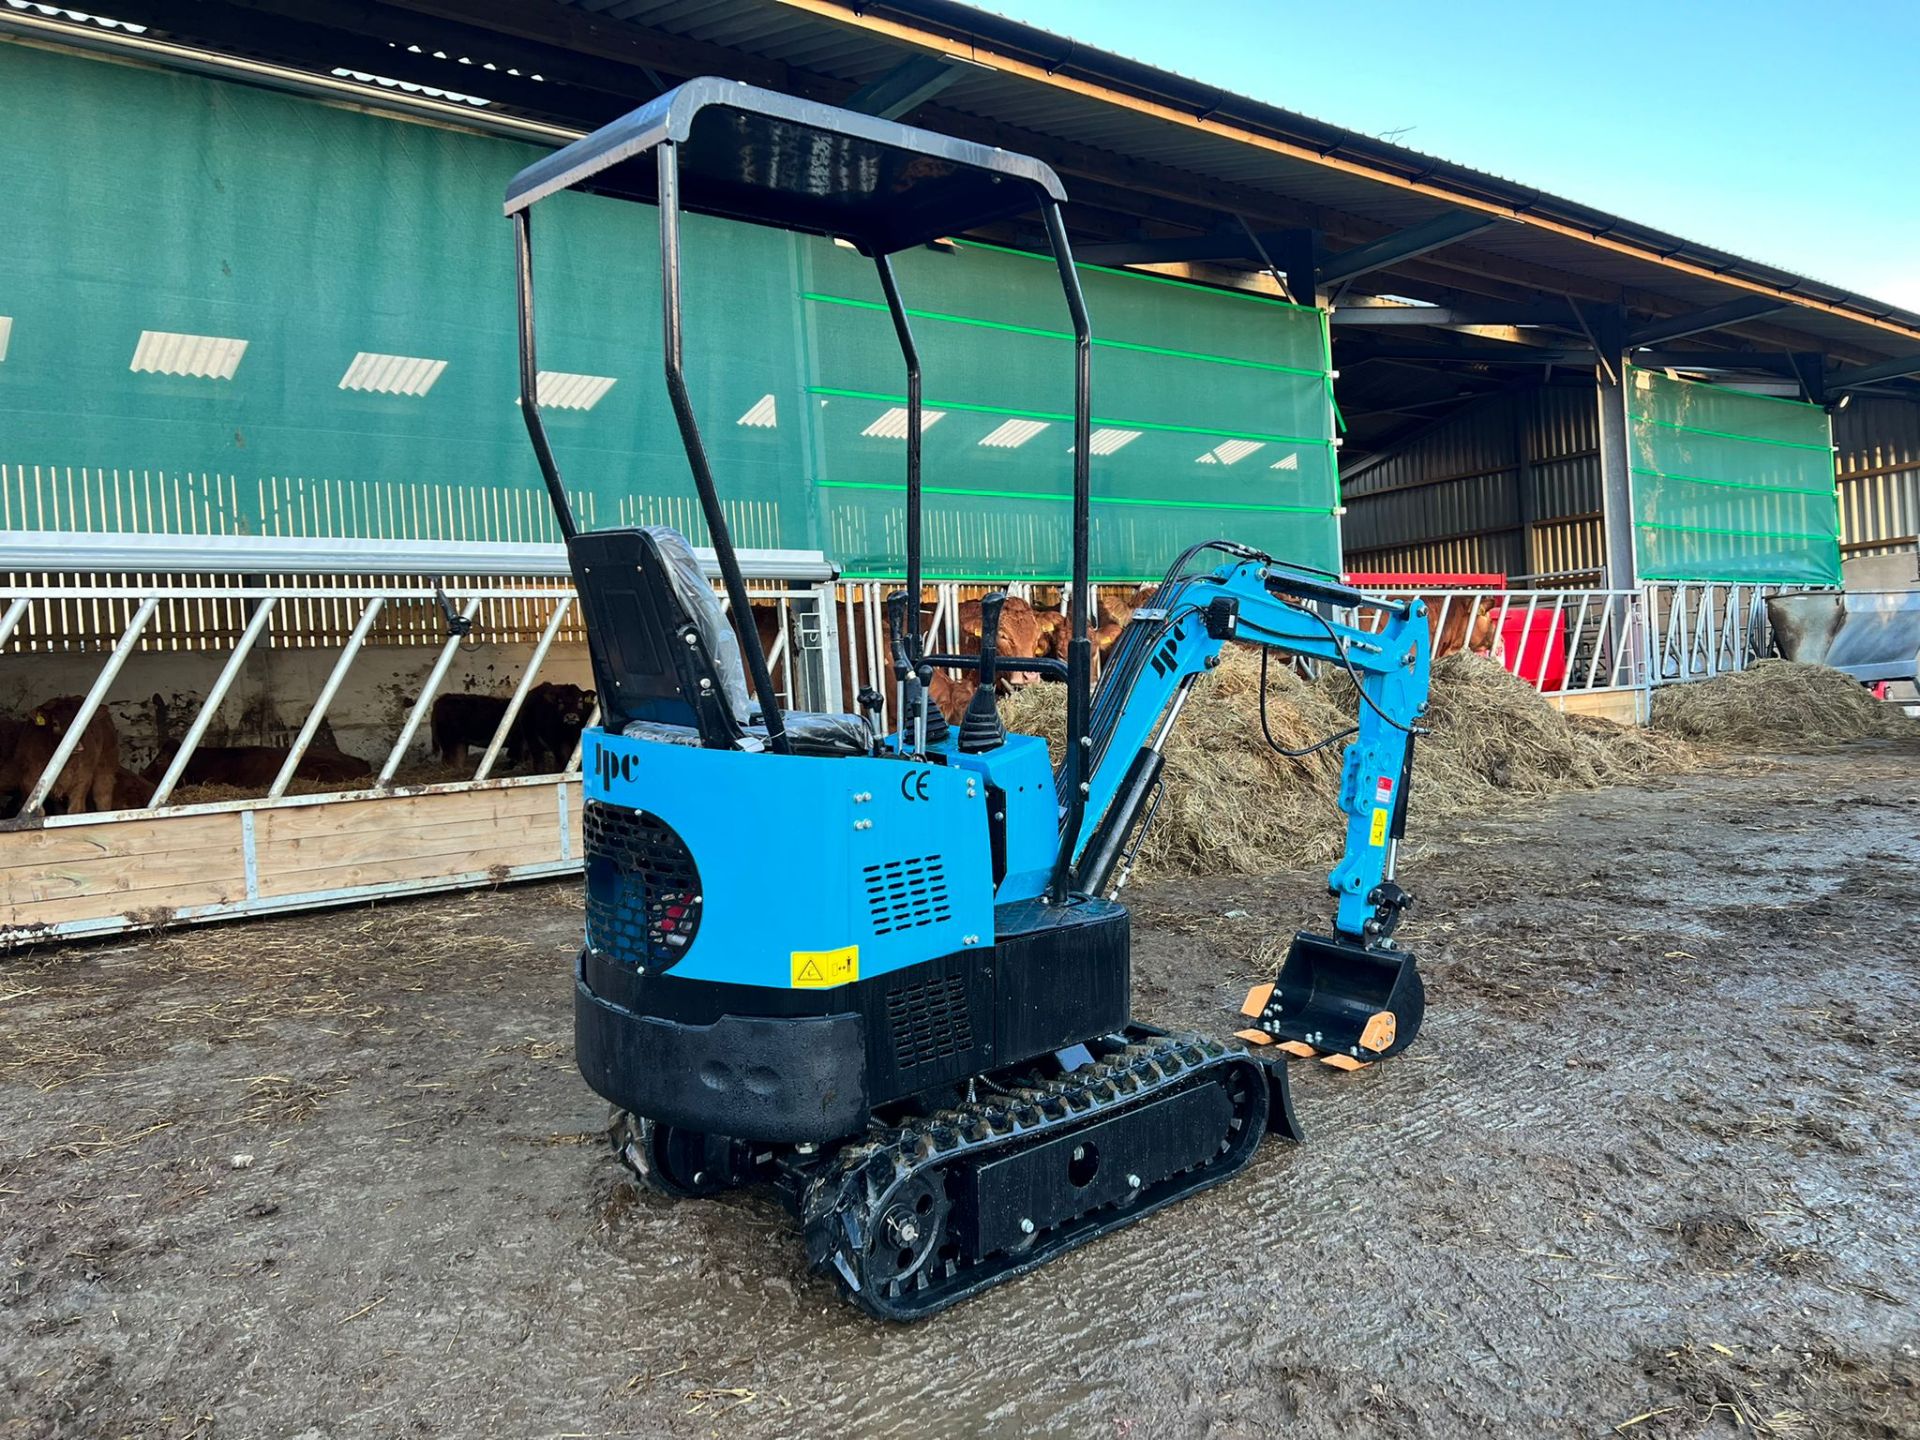 UNUSED JPC HT12 1 TON MINI DIGGER, RUNS DRIVES AND DIGS, PIPED FOR FRONT ATTACHMENTS - Image 6 of 11